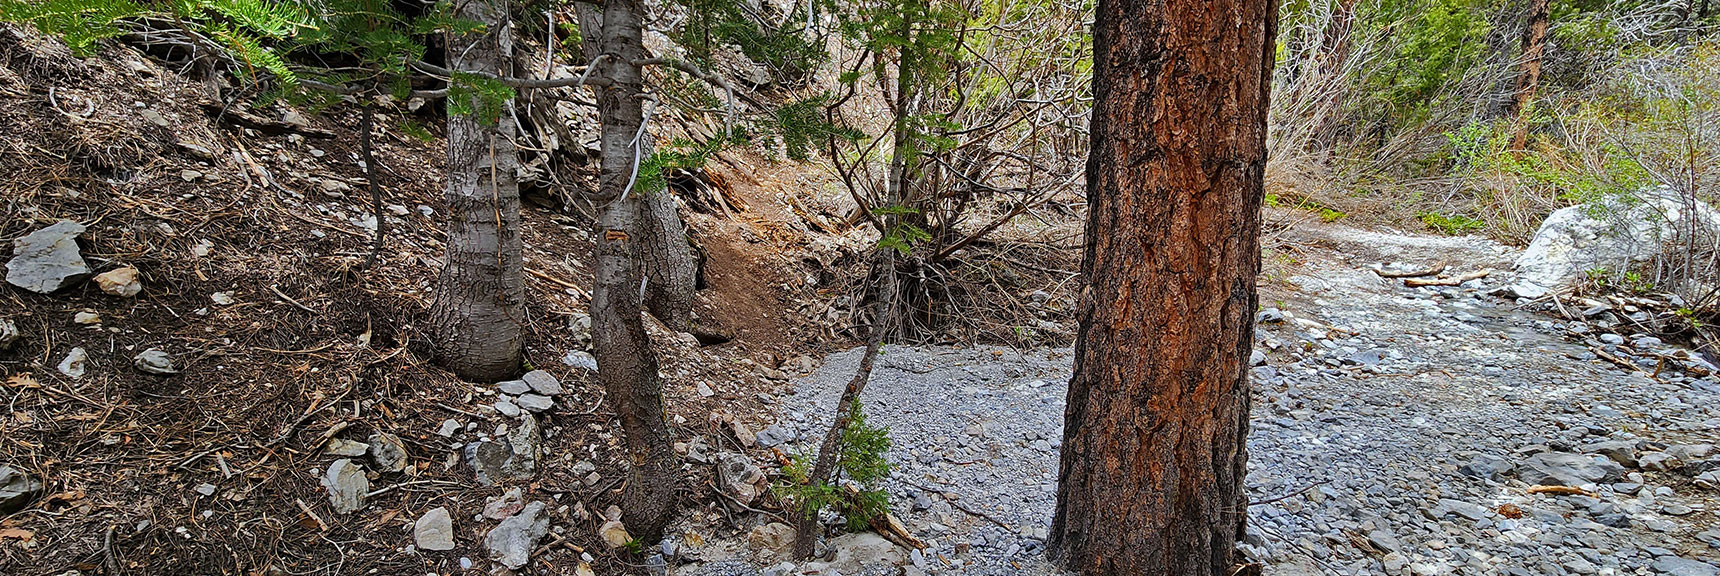 Good Trail Ends Here, Narrow Trail Continues to Left | Fletcher Canyon Trail | Mt Charleston Wilderness | Spring Mountains, Nevada